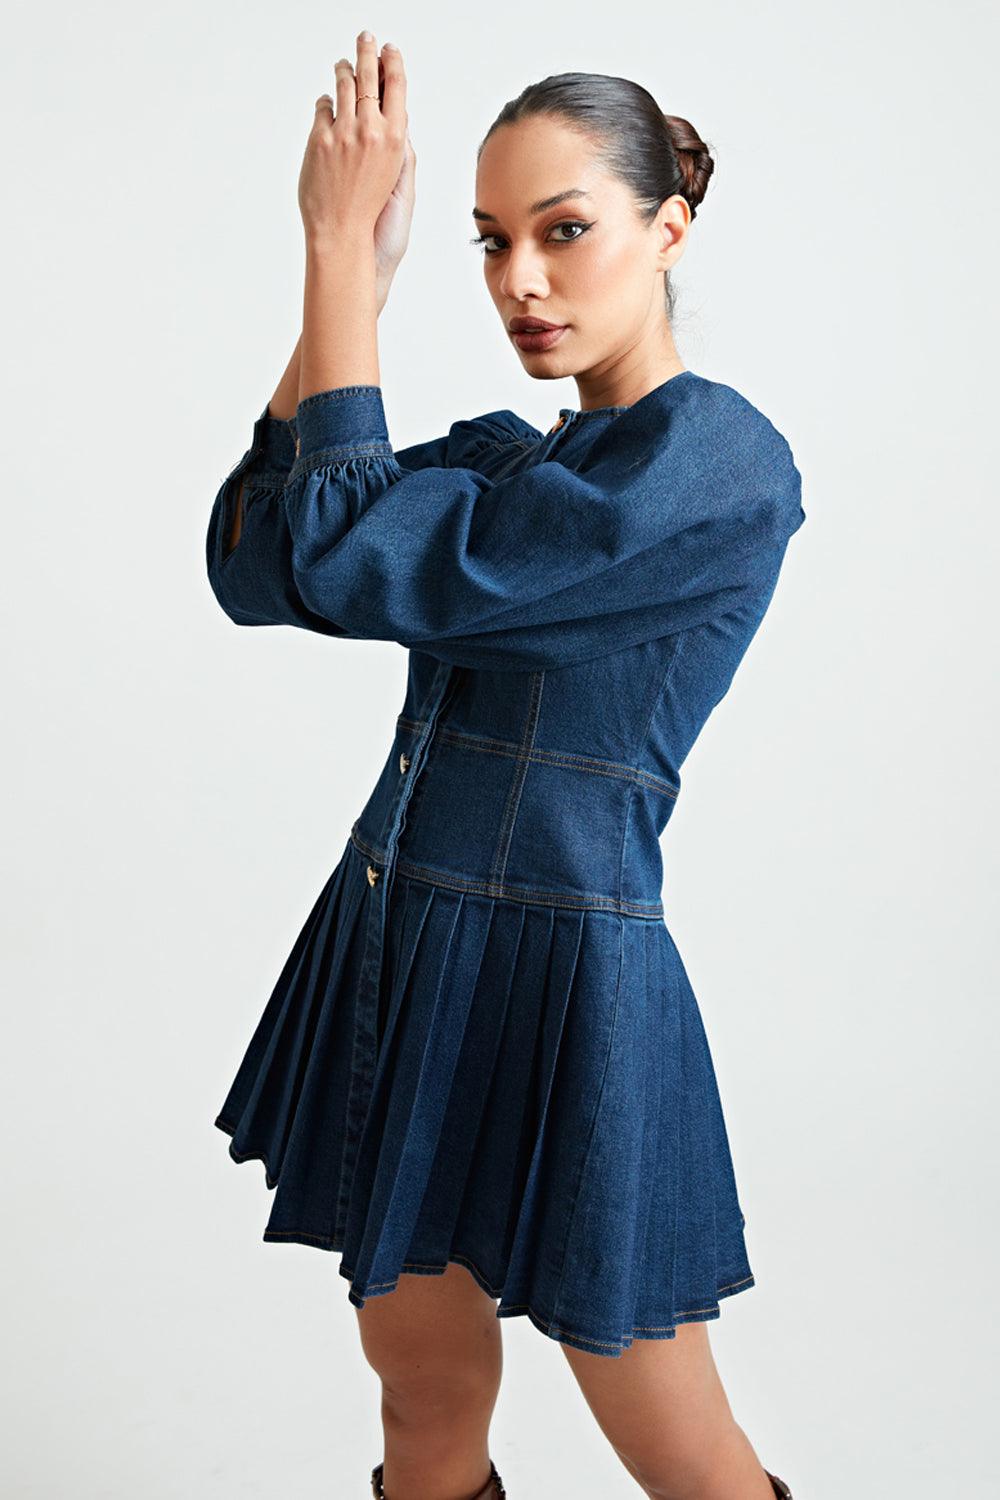 Denim Pleated Dress with Golden Buttons - ANI CLOTHING